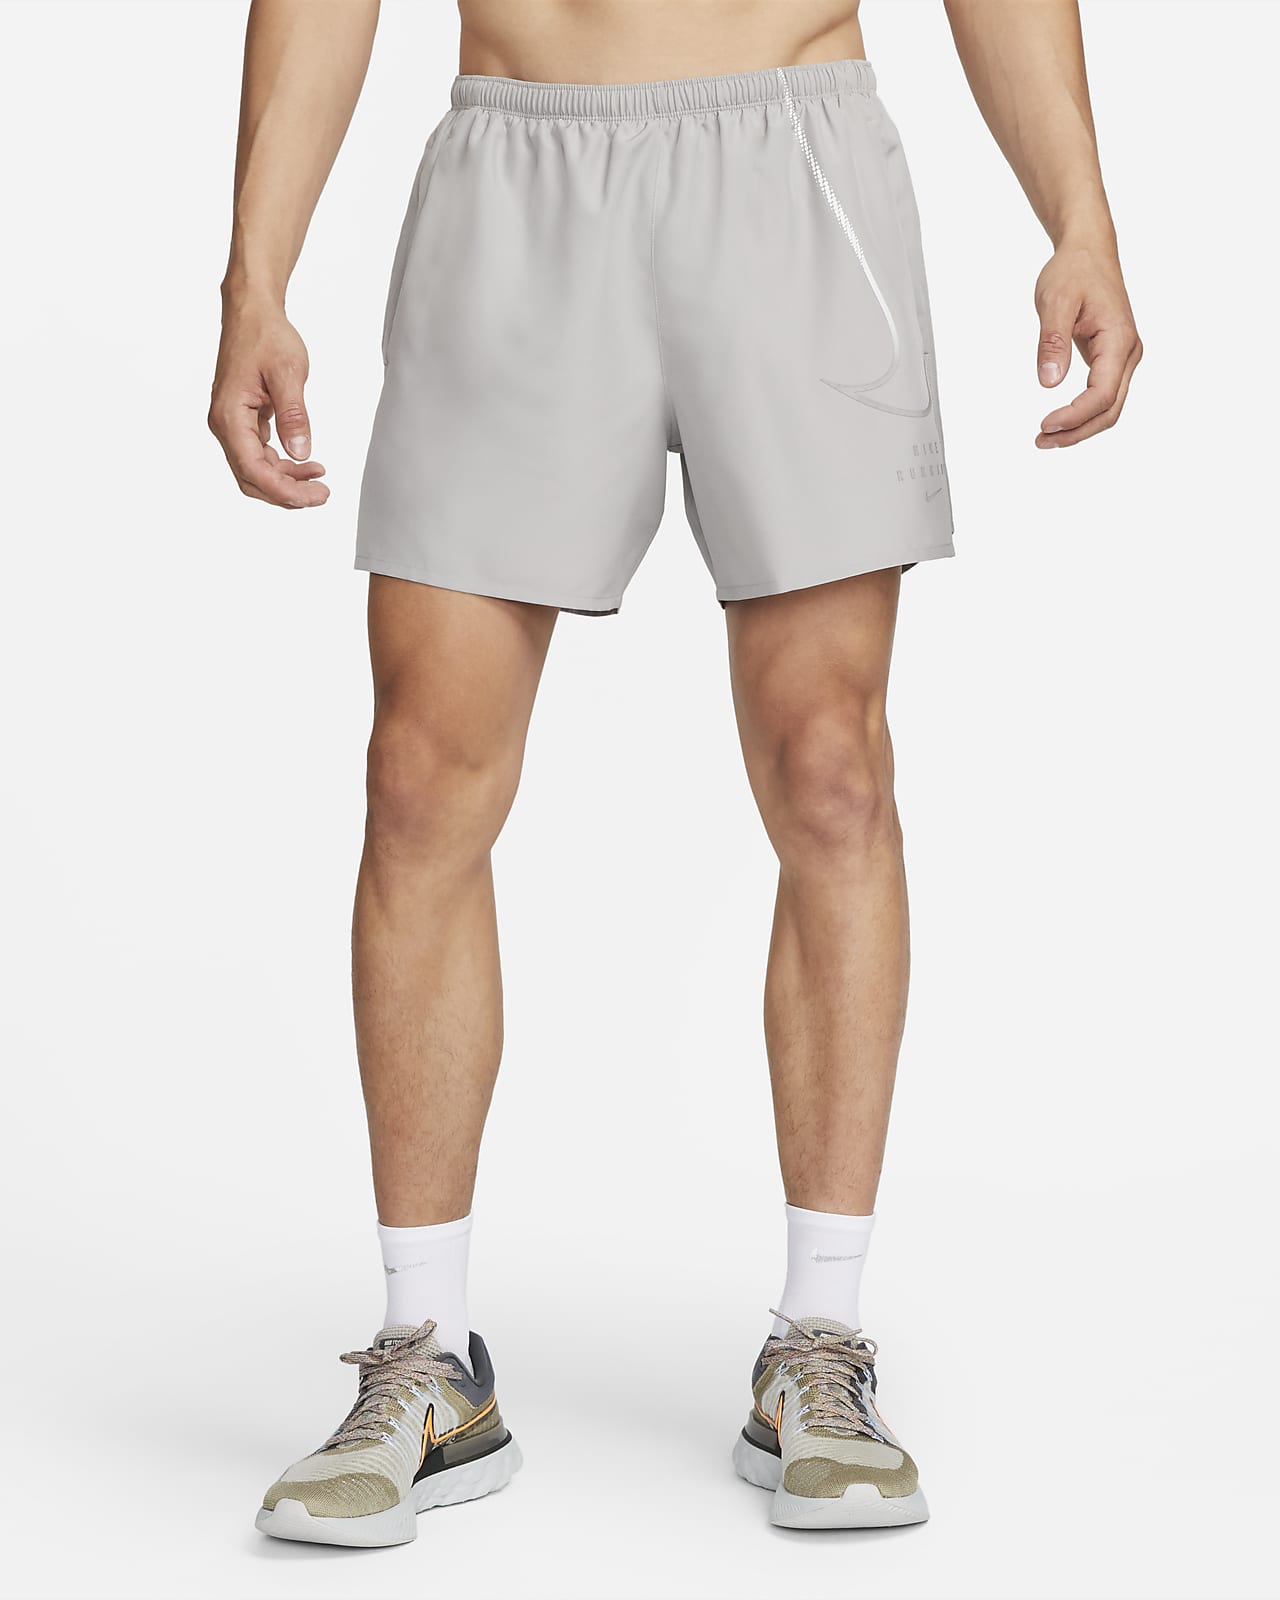 Nike Running Challenger Dri-FIT 2-in-1 5 inch shorts in grey